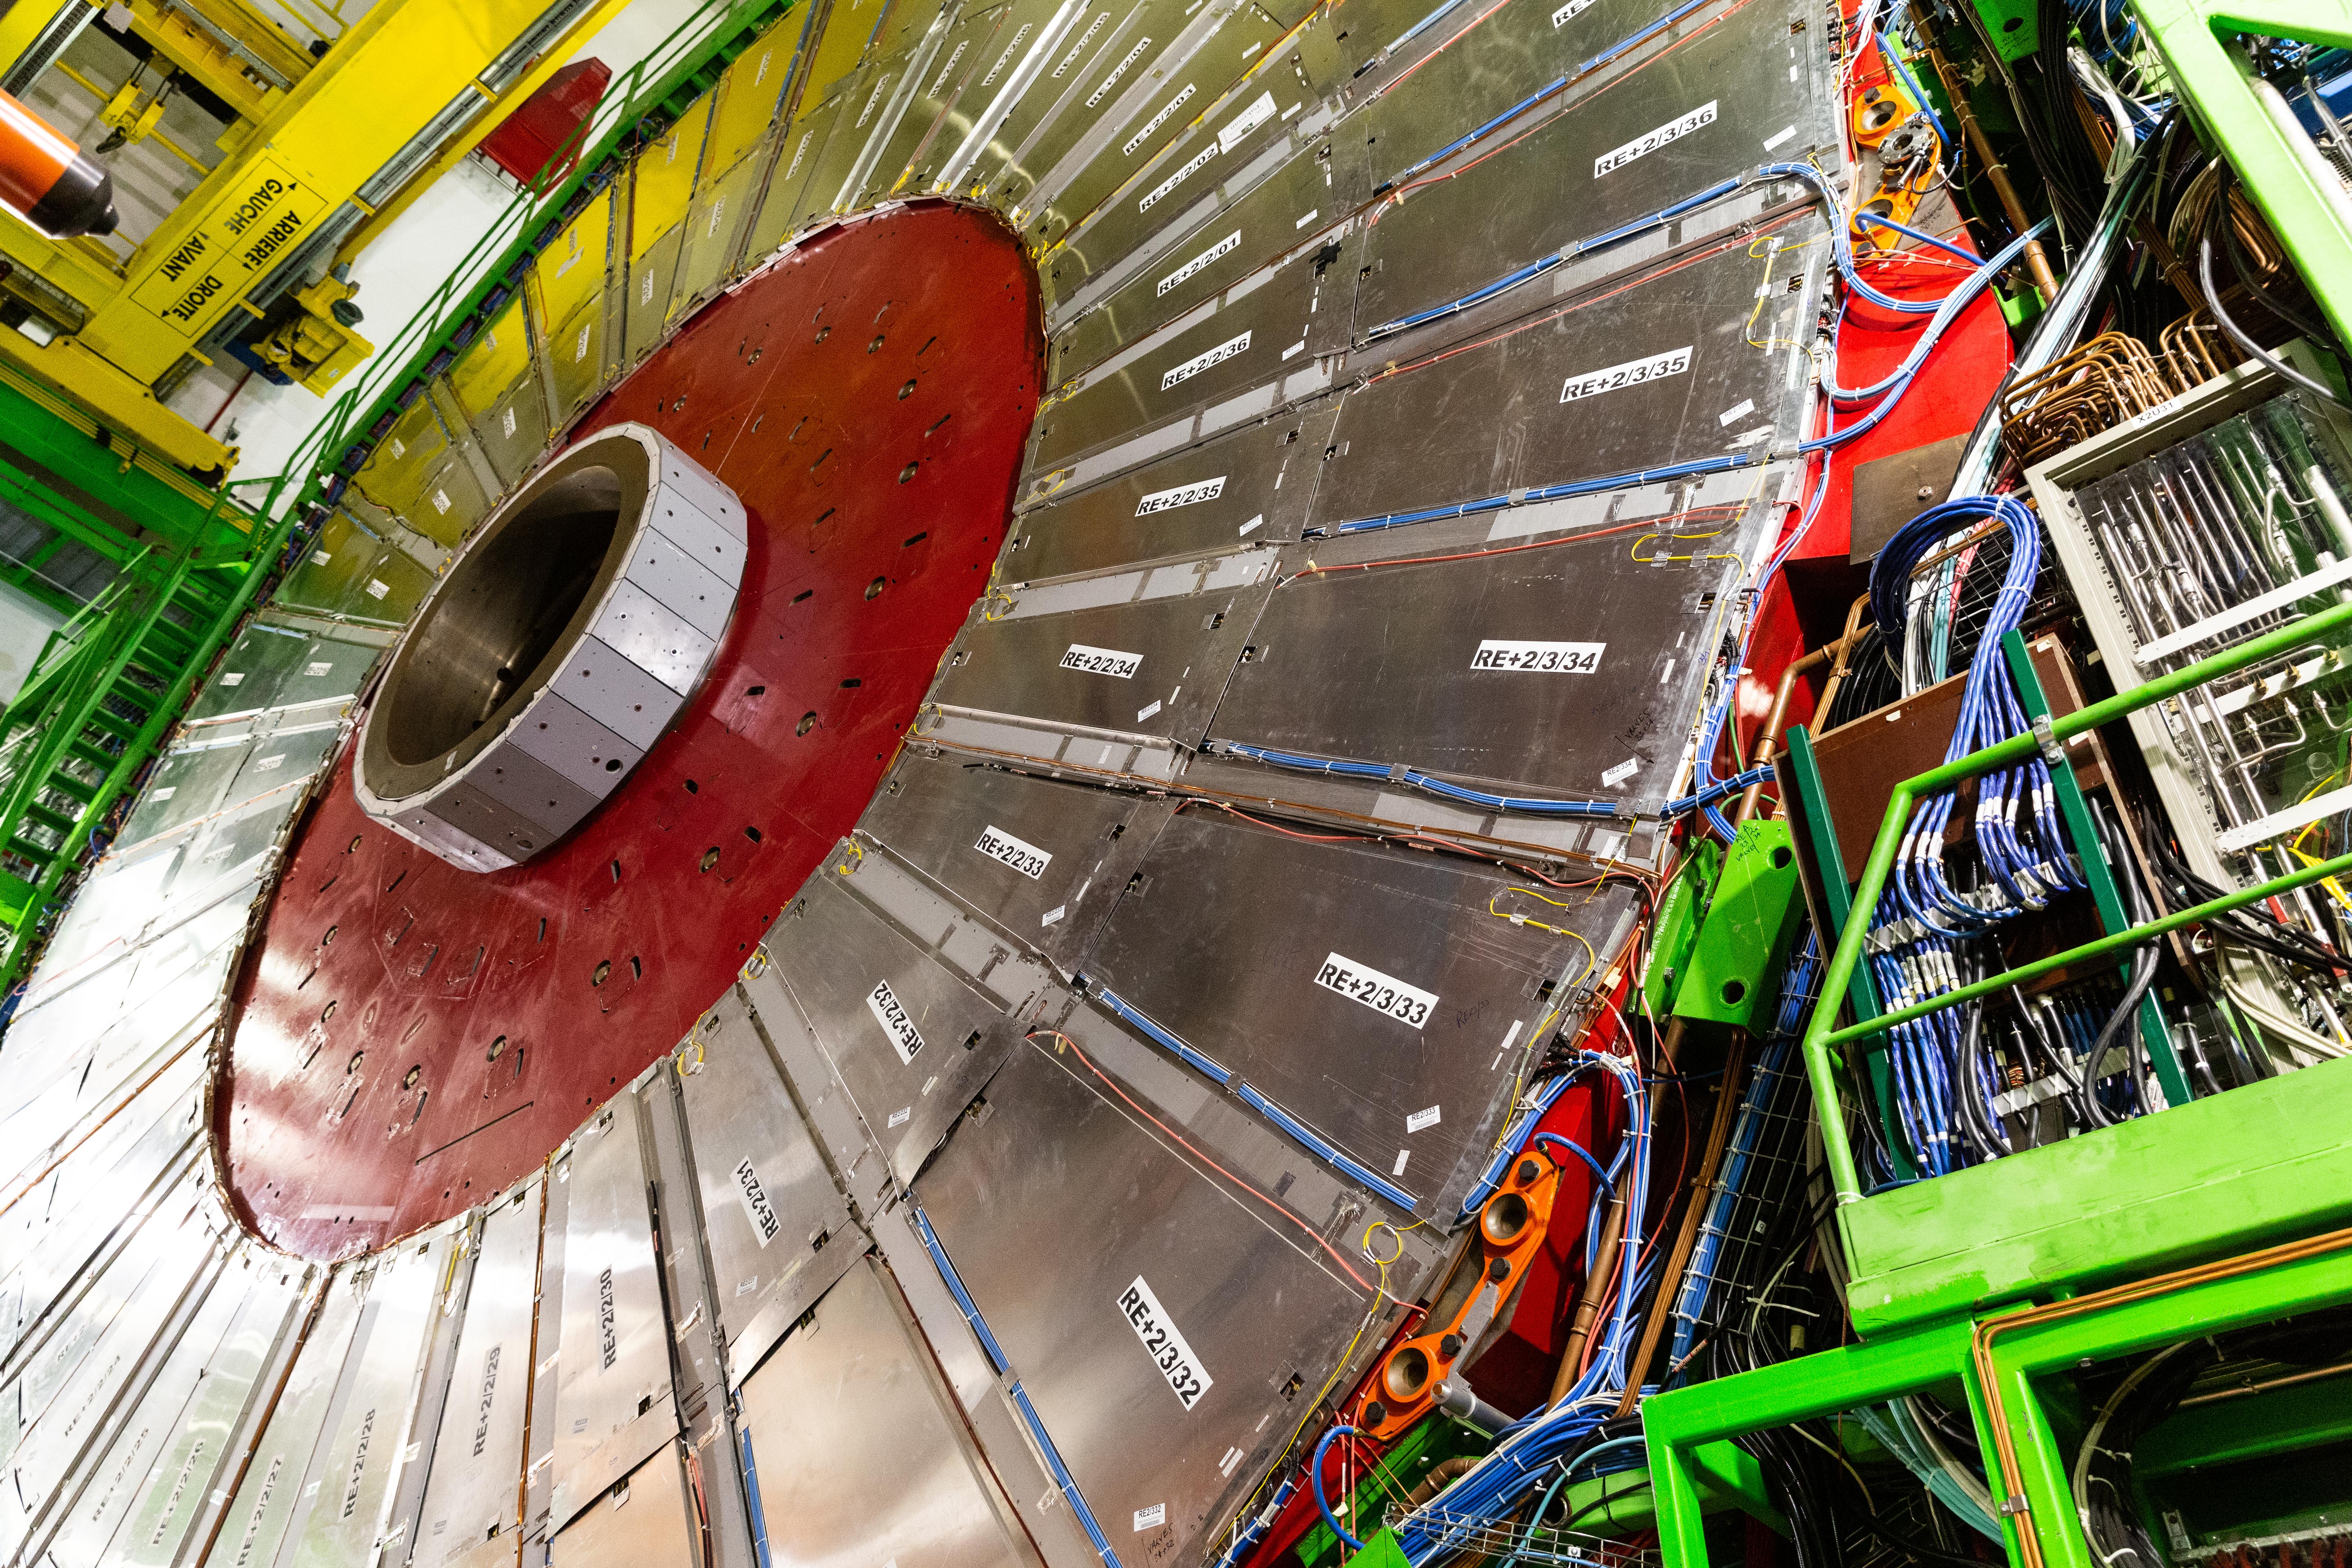 The LHC will switch on next year after a long shutdown